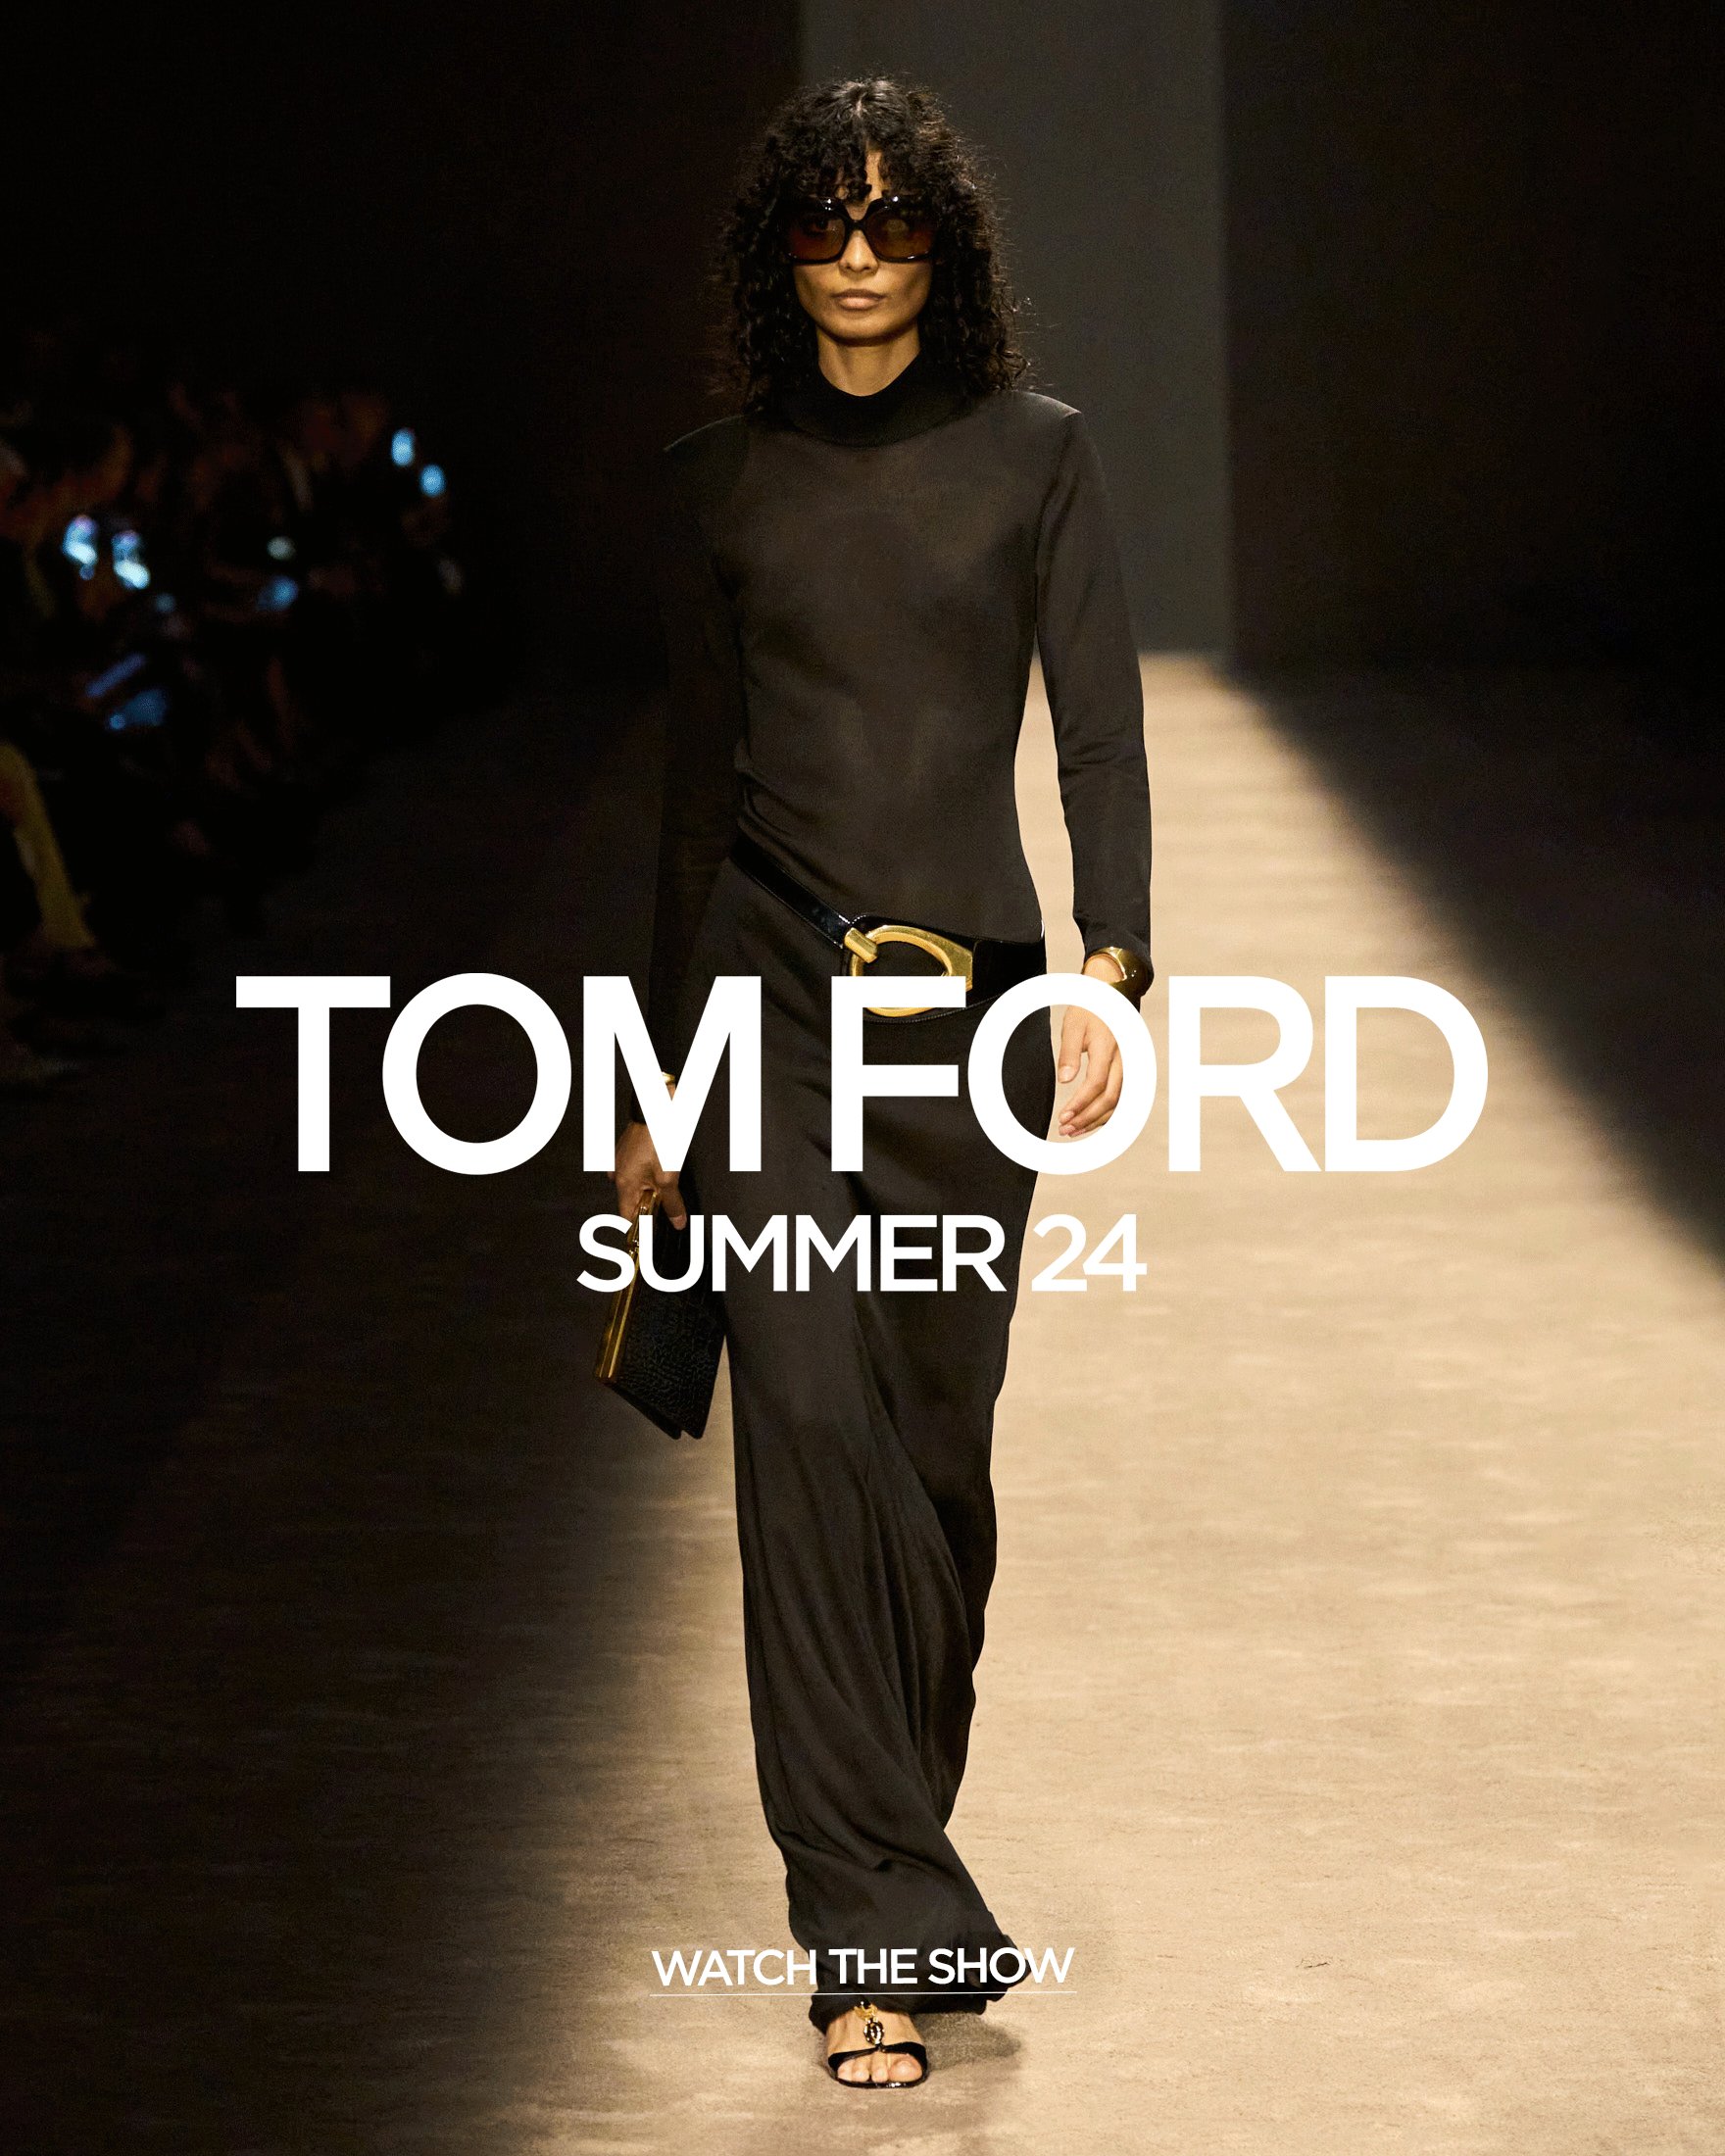 WATCH NOW  TOM FORD SUMMER 24 RUNWAY SHOW - Tom Ford